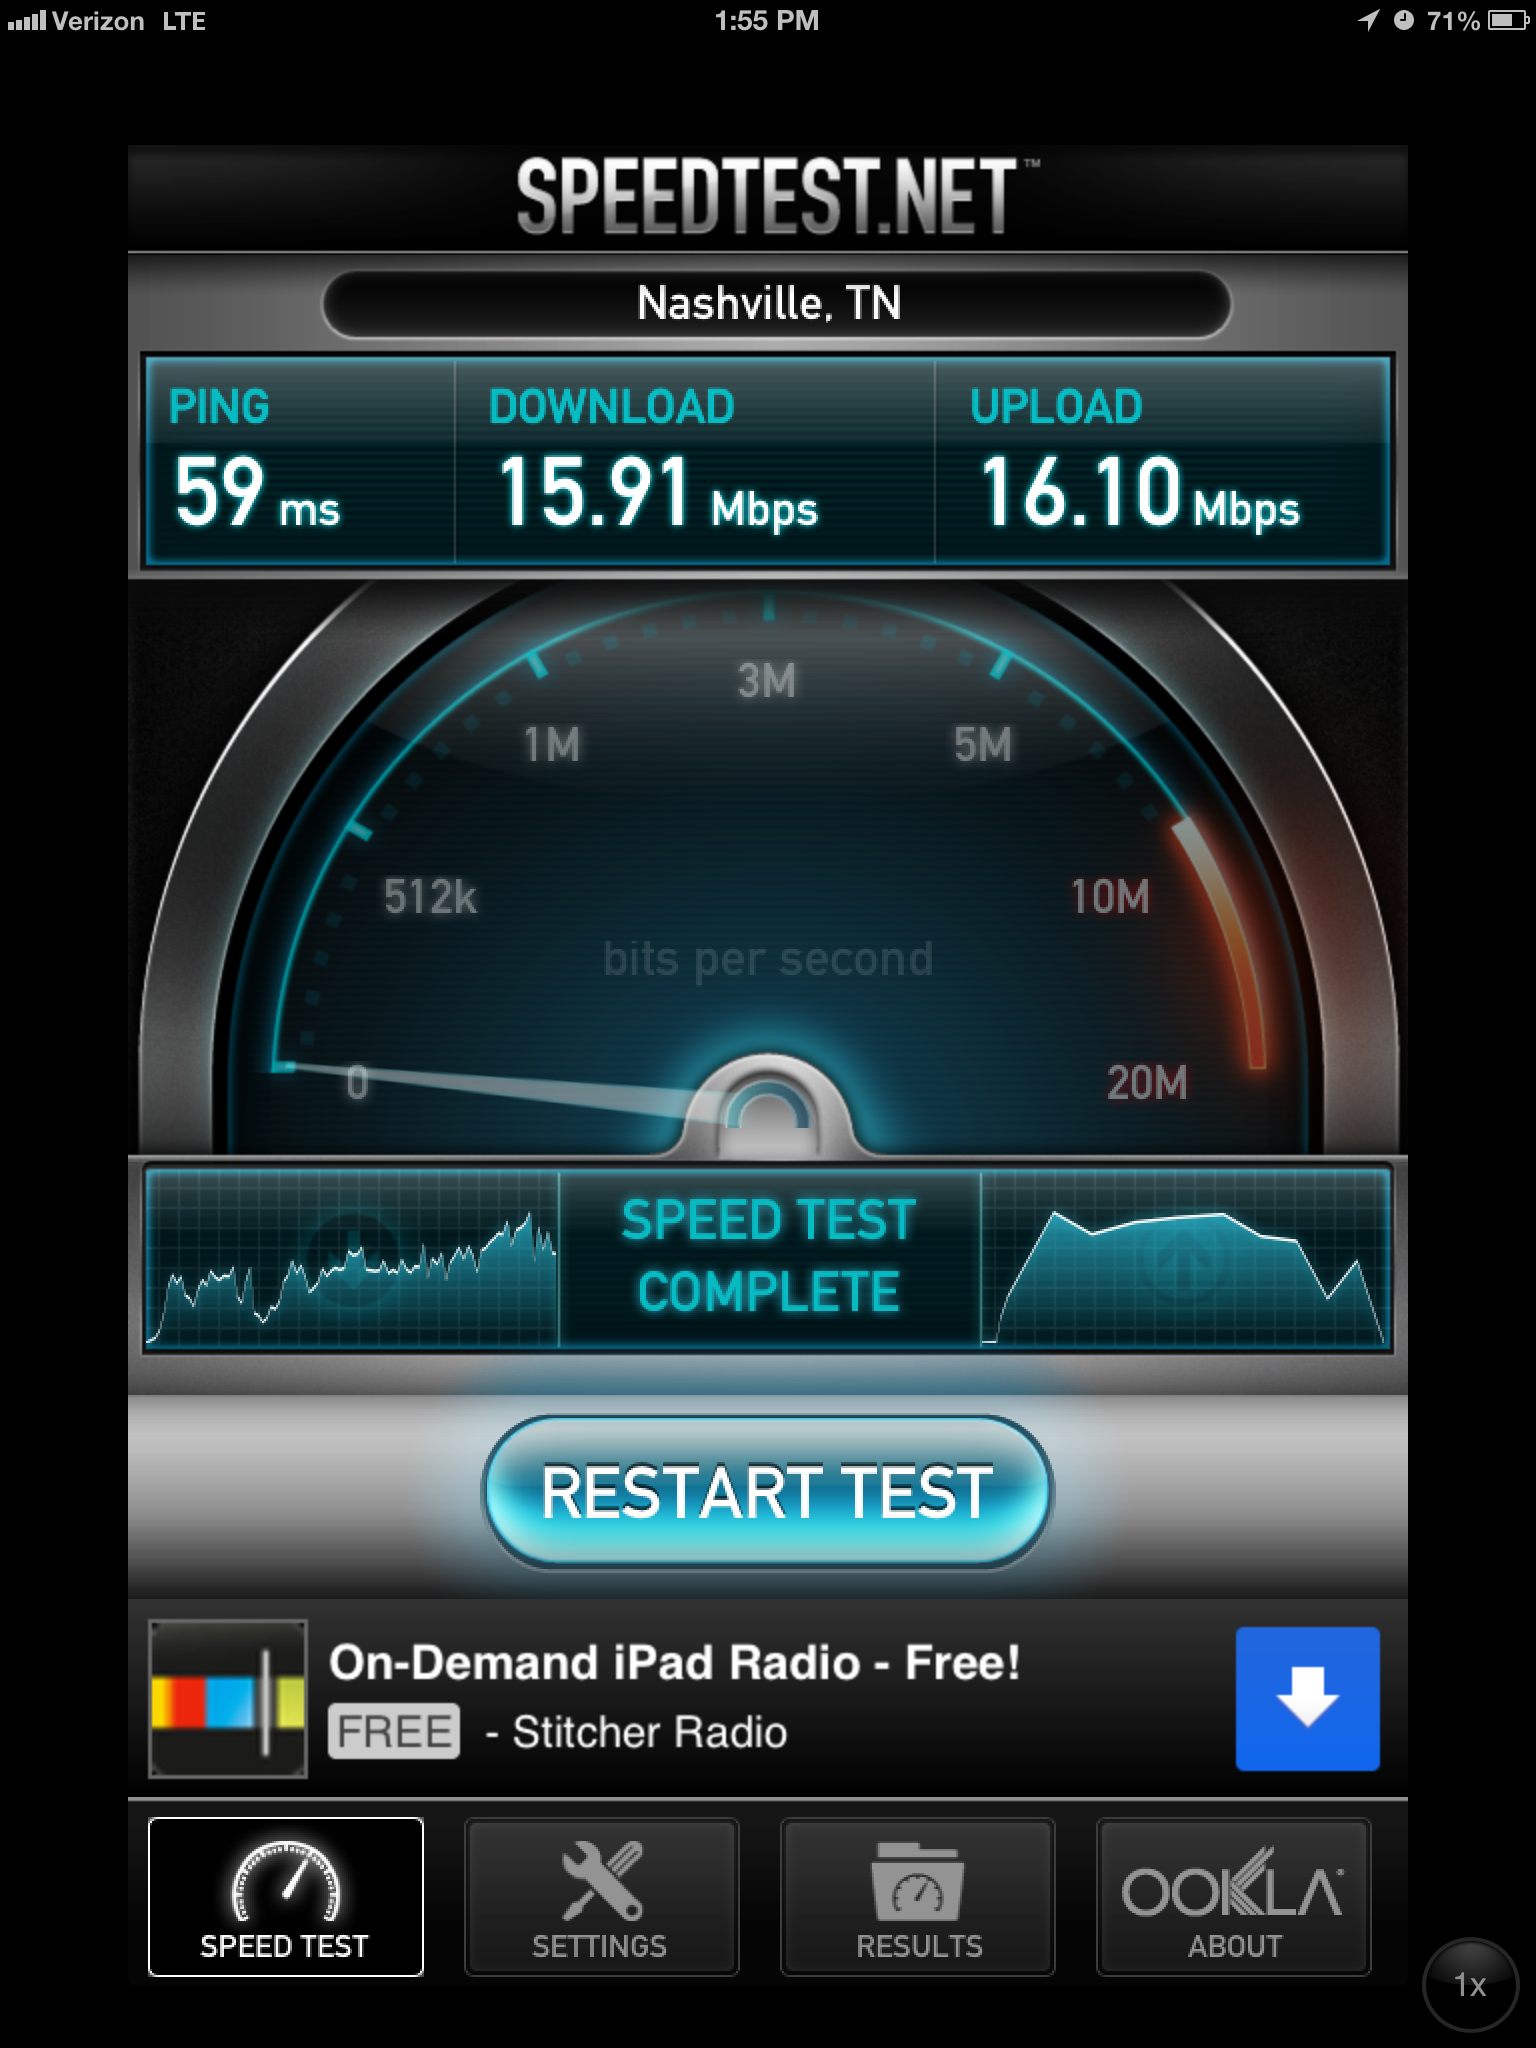 Speedtest on Verizon's LTE network showing 15.91mbps down and 16.10mbps up